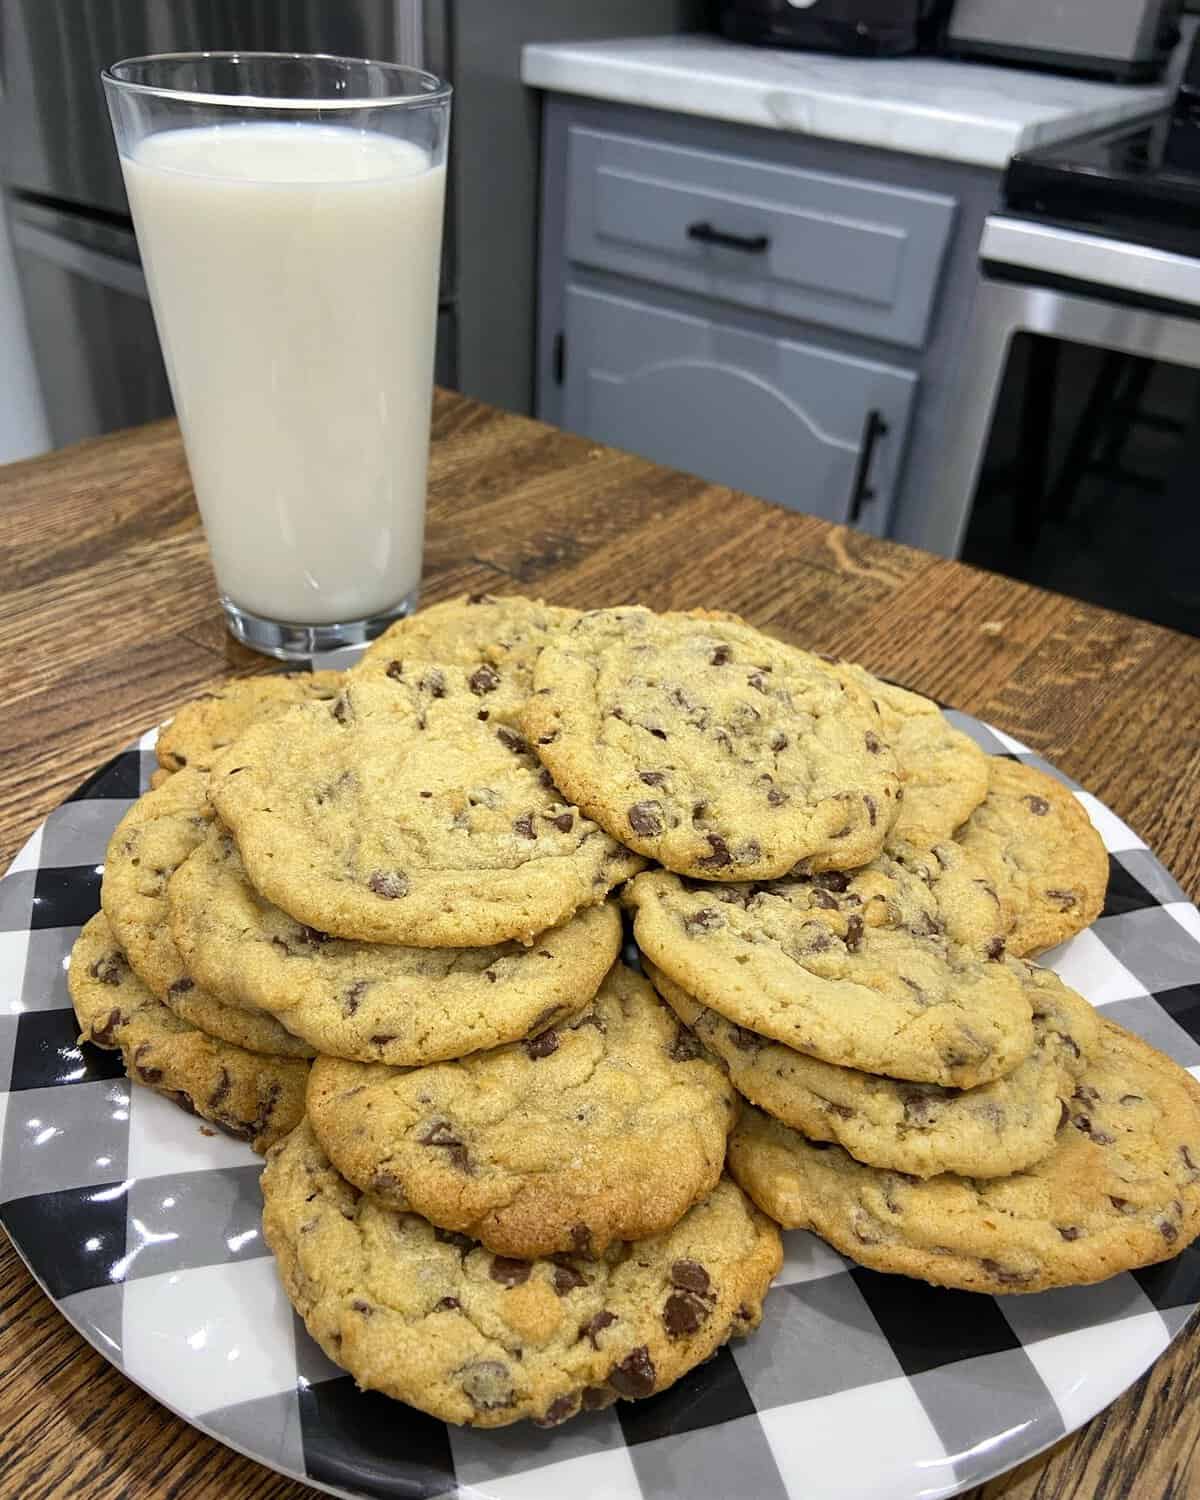 Easy & Delicious Chocolate Chip Cookies, Wilton's Baking Blog